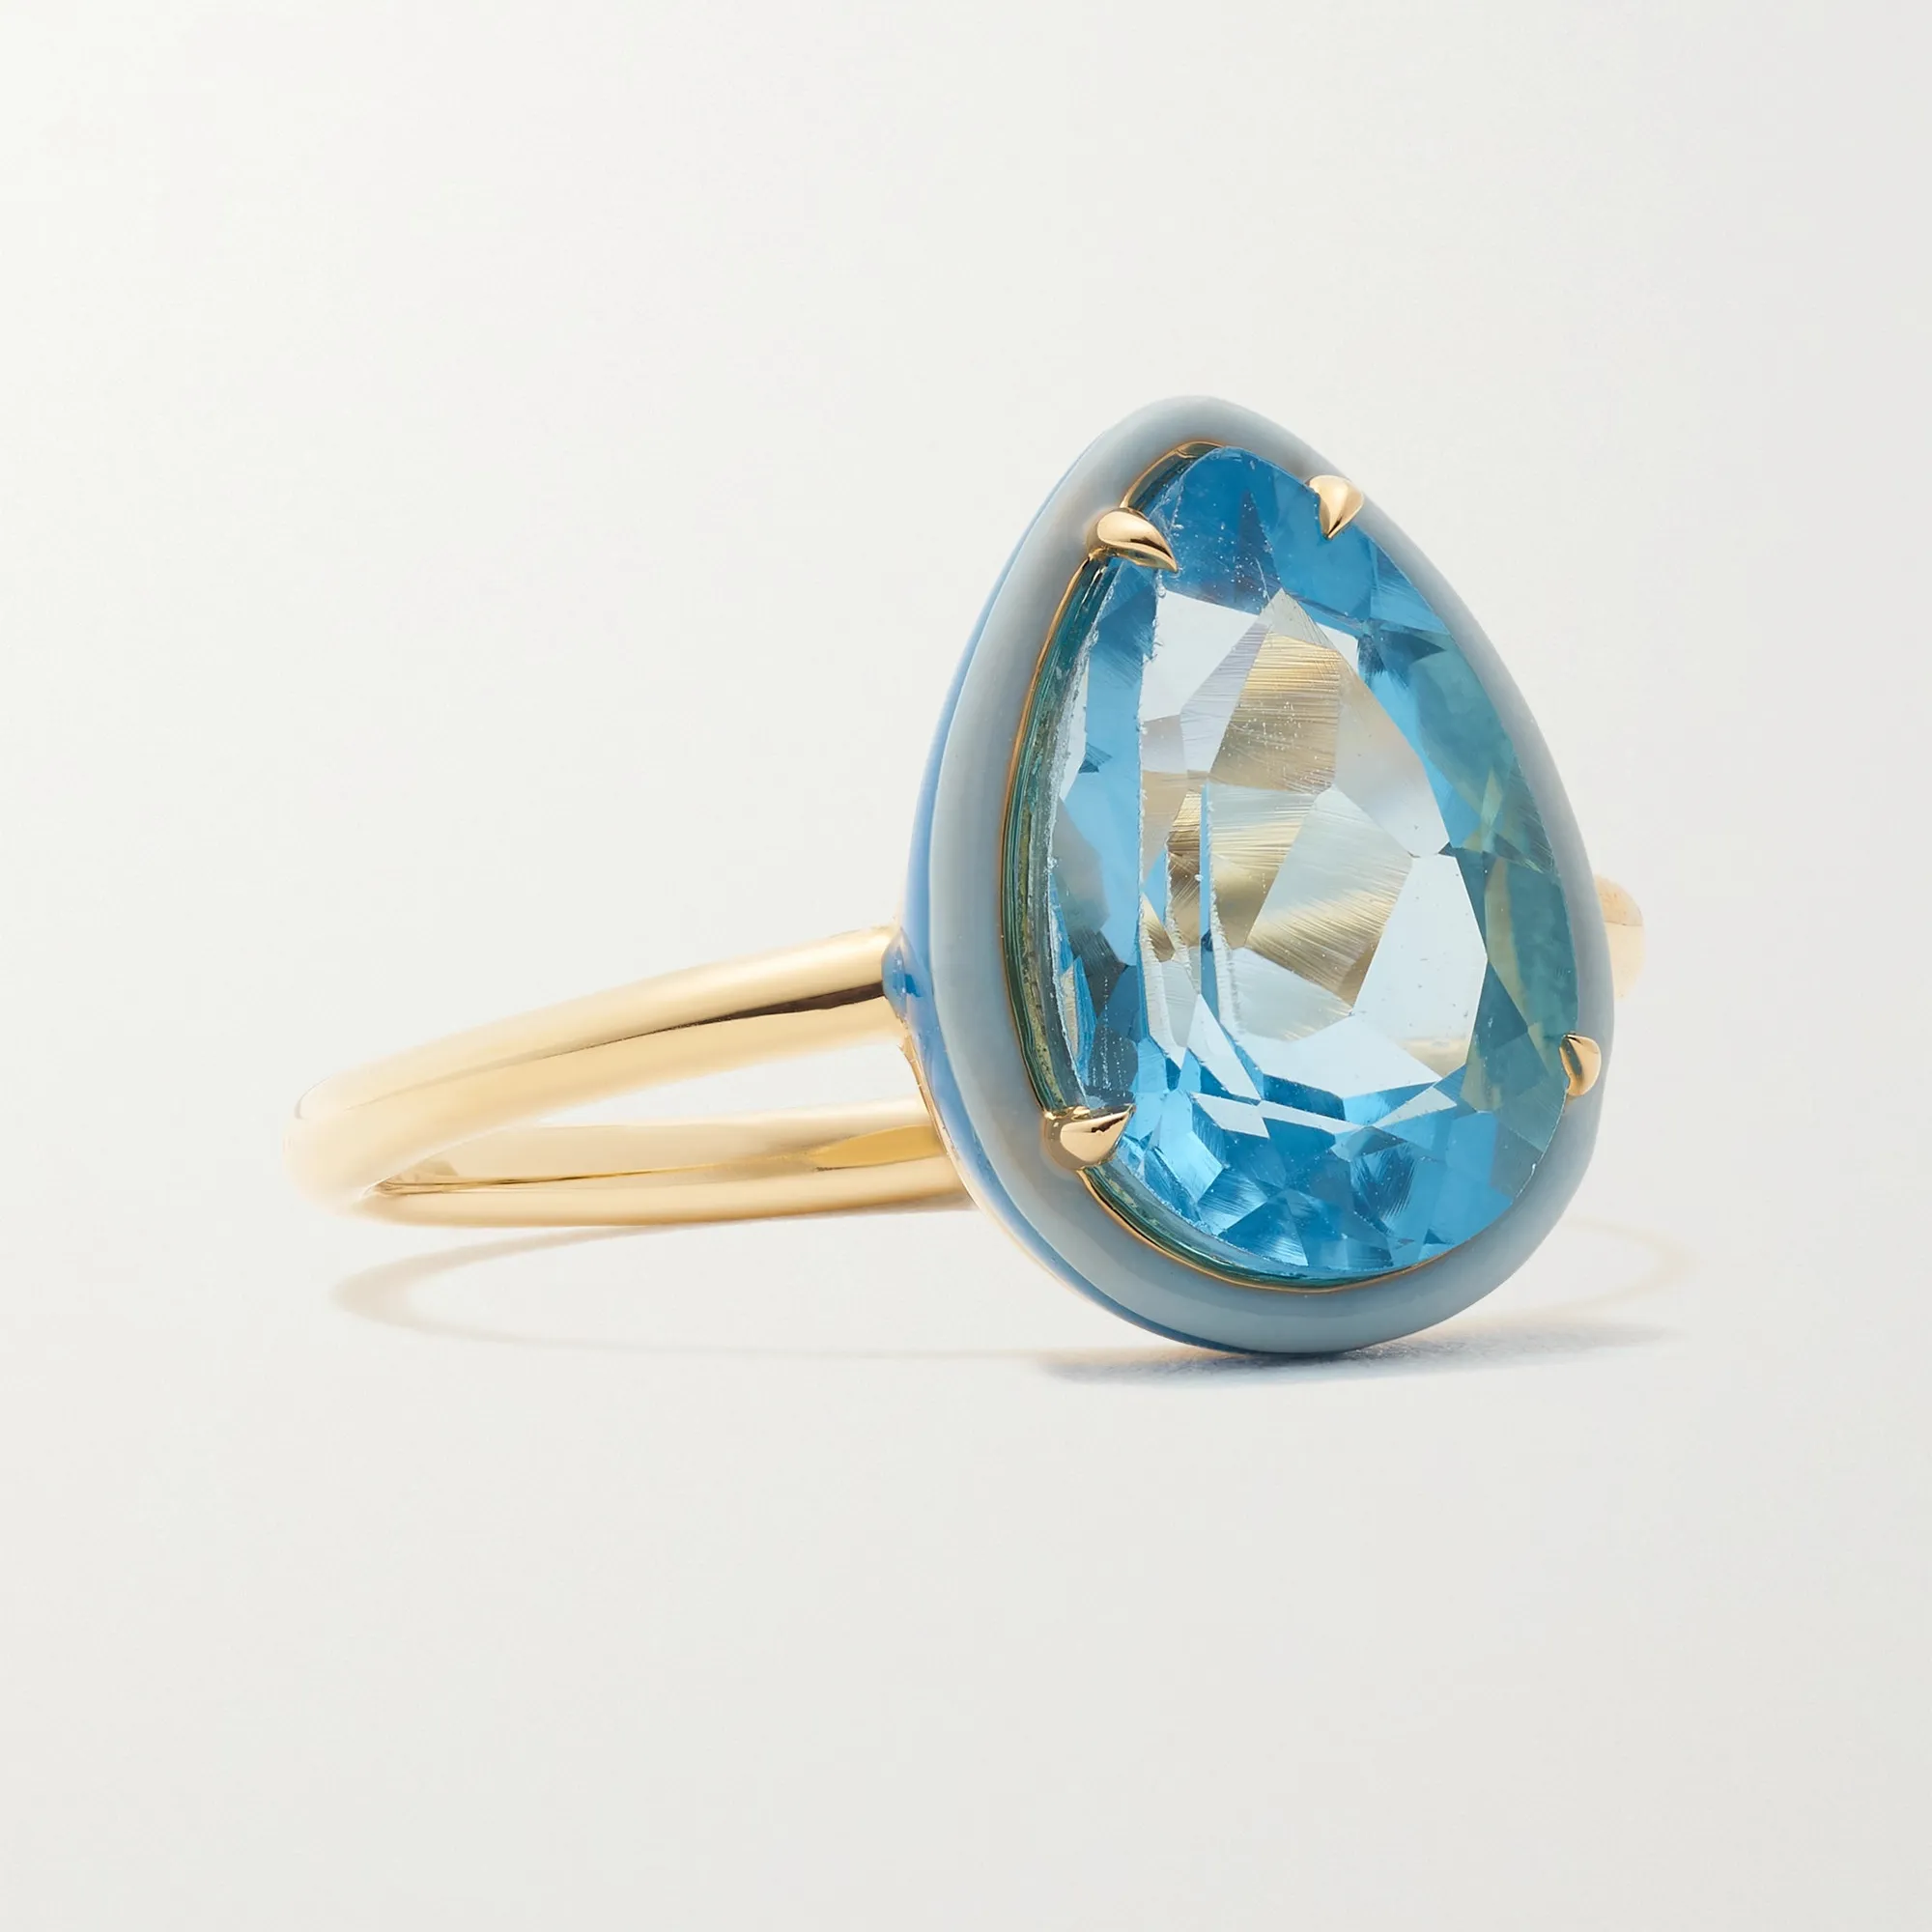 Pear-Shaped Cocktail Ring gold plated 925 sterling silver Blue Citrine gemstone Glacier Drop Cut Blue Ring